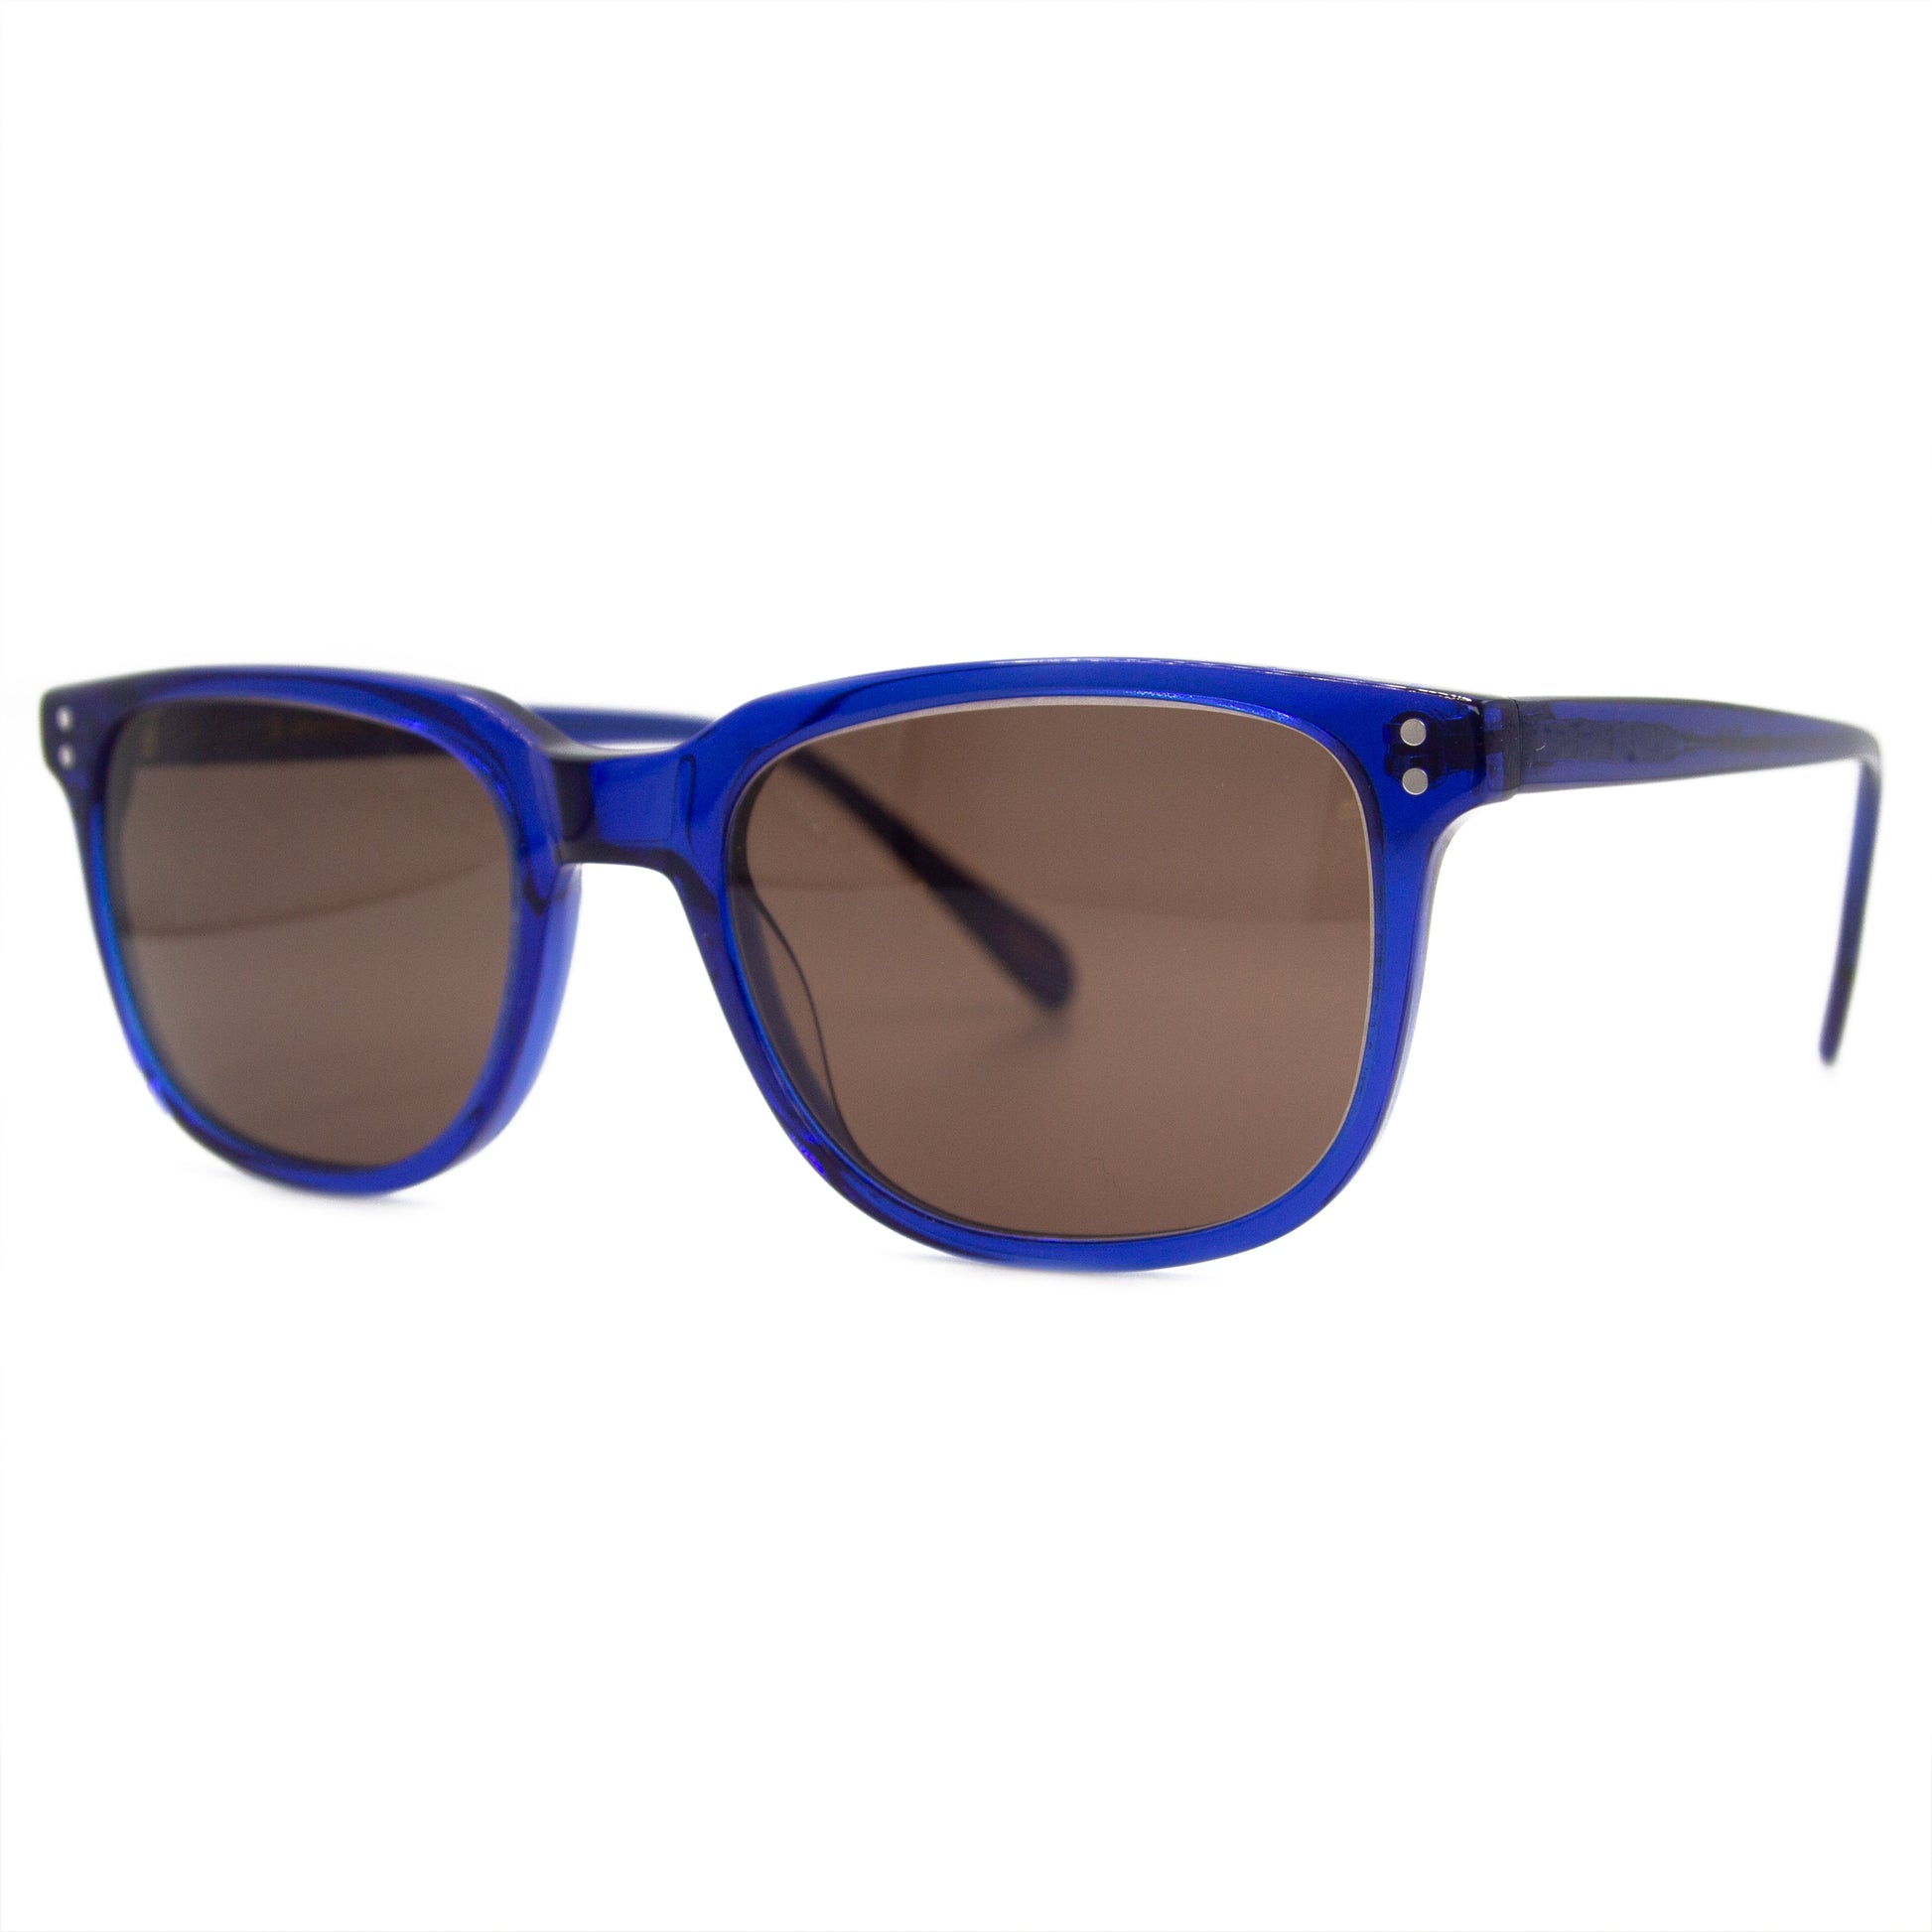 3 brothers - Theo - Navy - Prescription Sunglasses - Side 